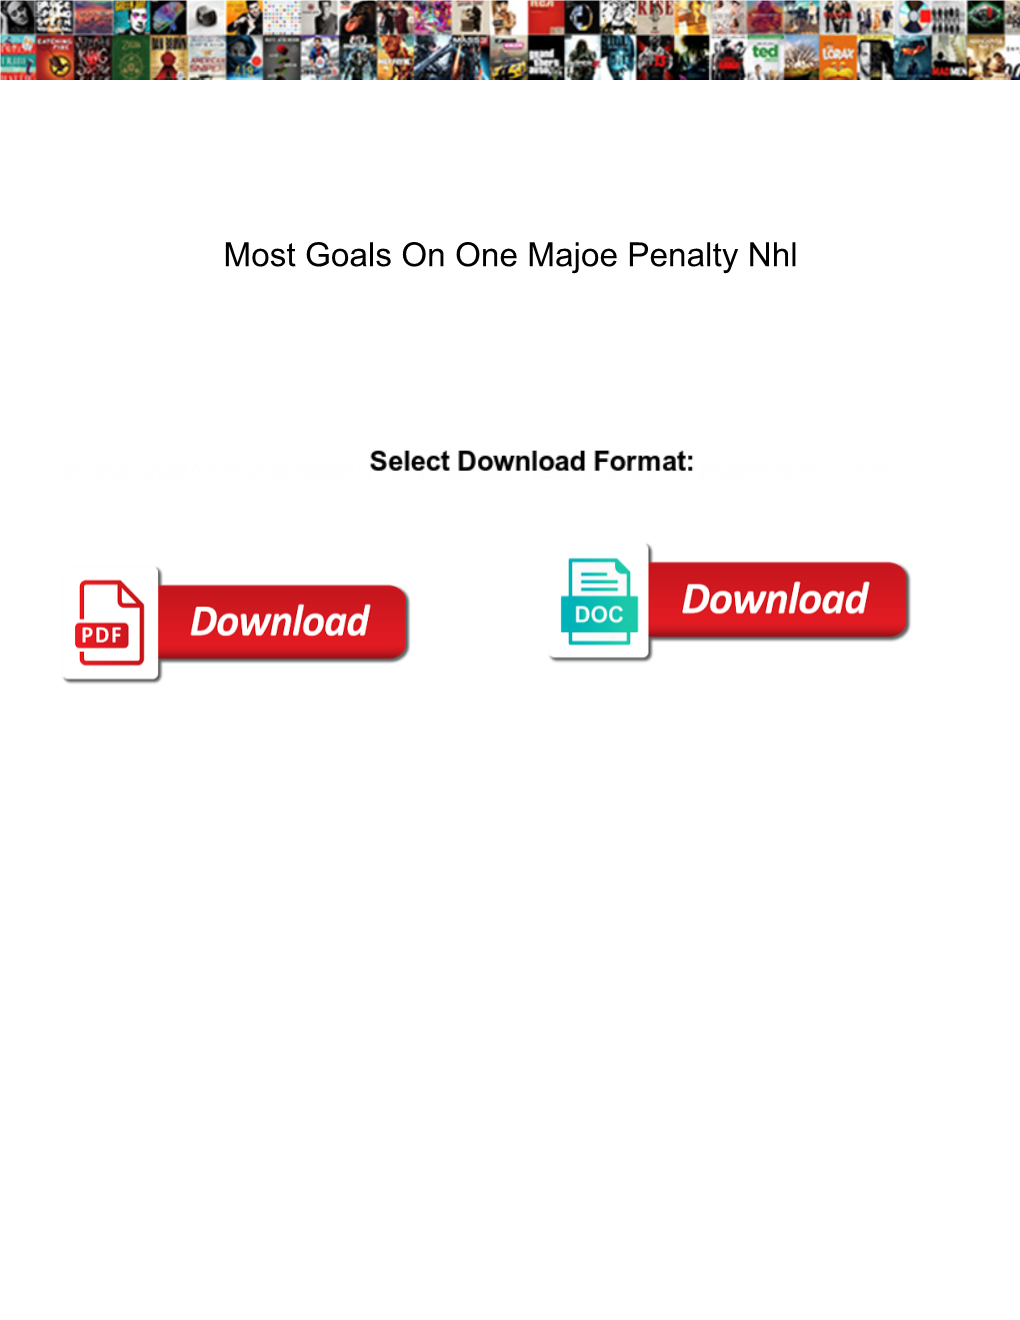 Most Goals on One Majoe Penalty Nhl